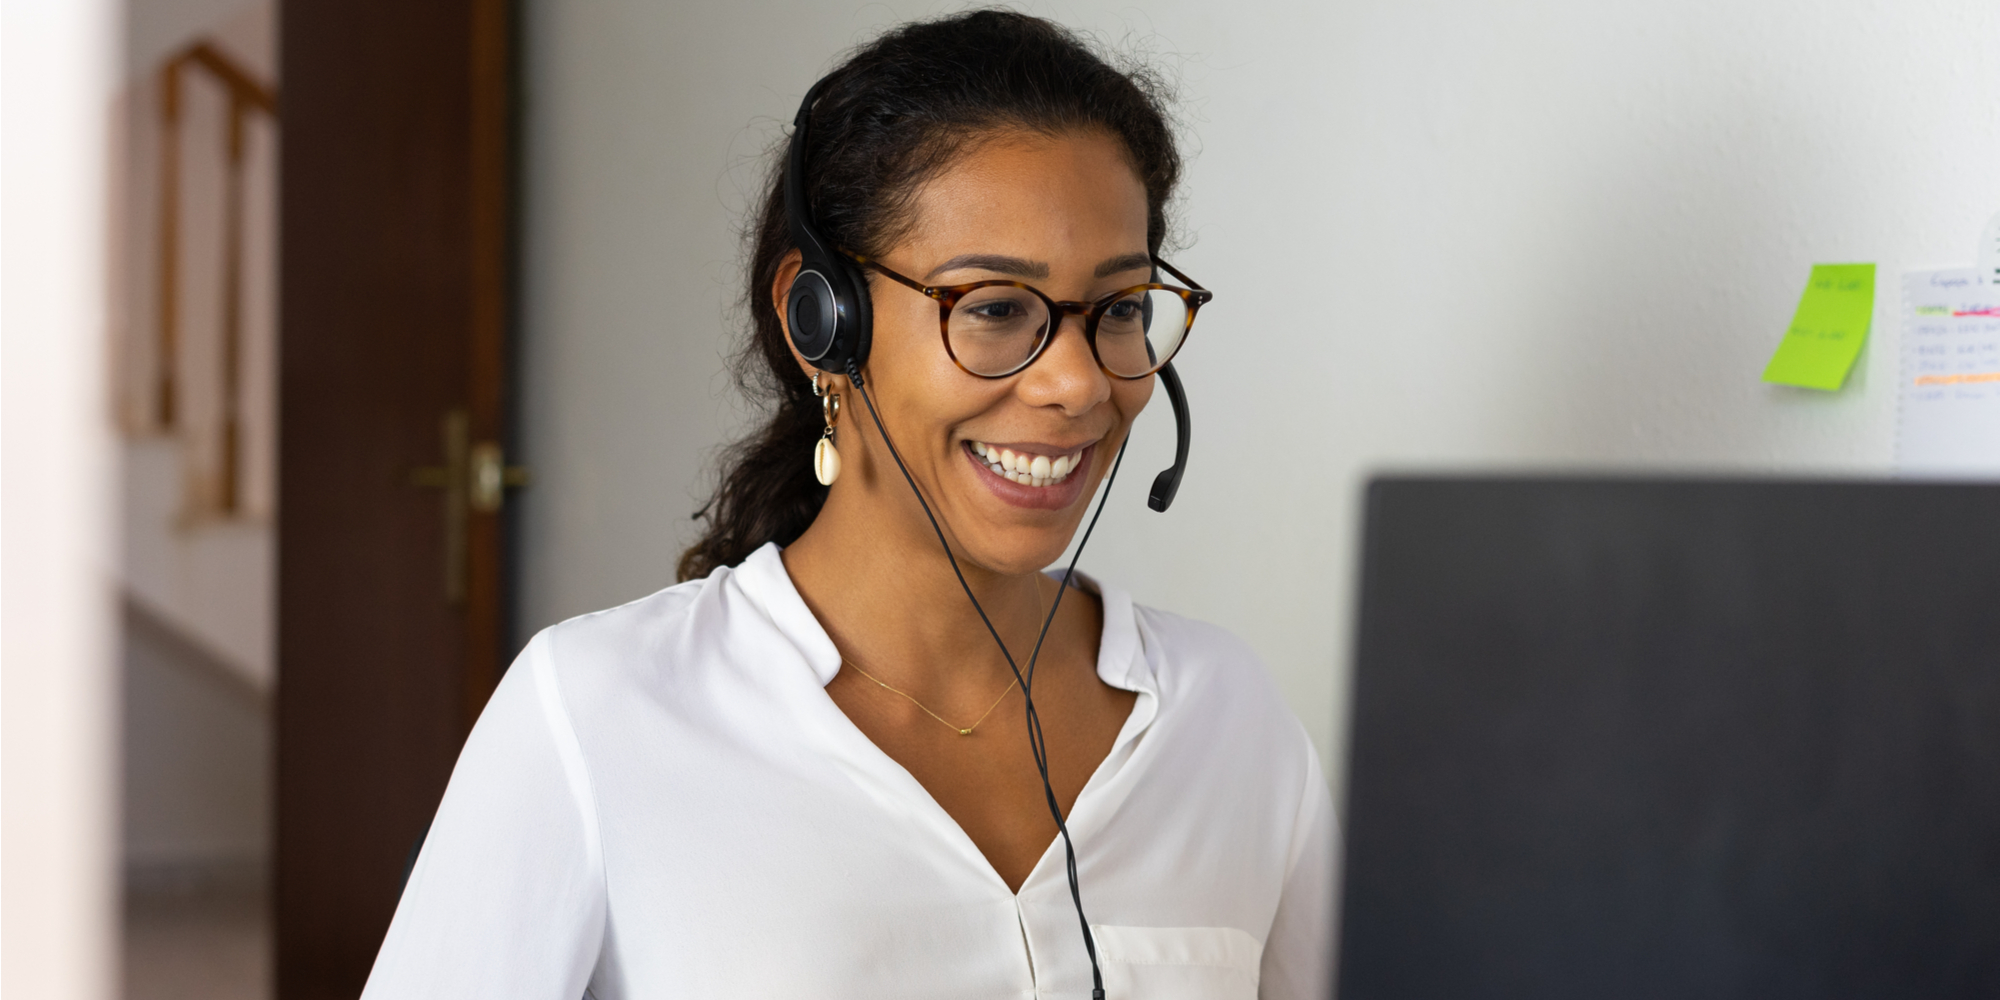 Woman on headset smiling